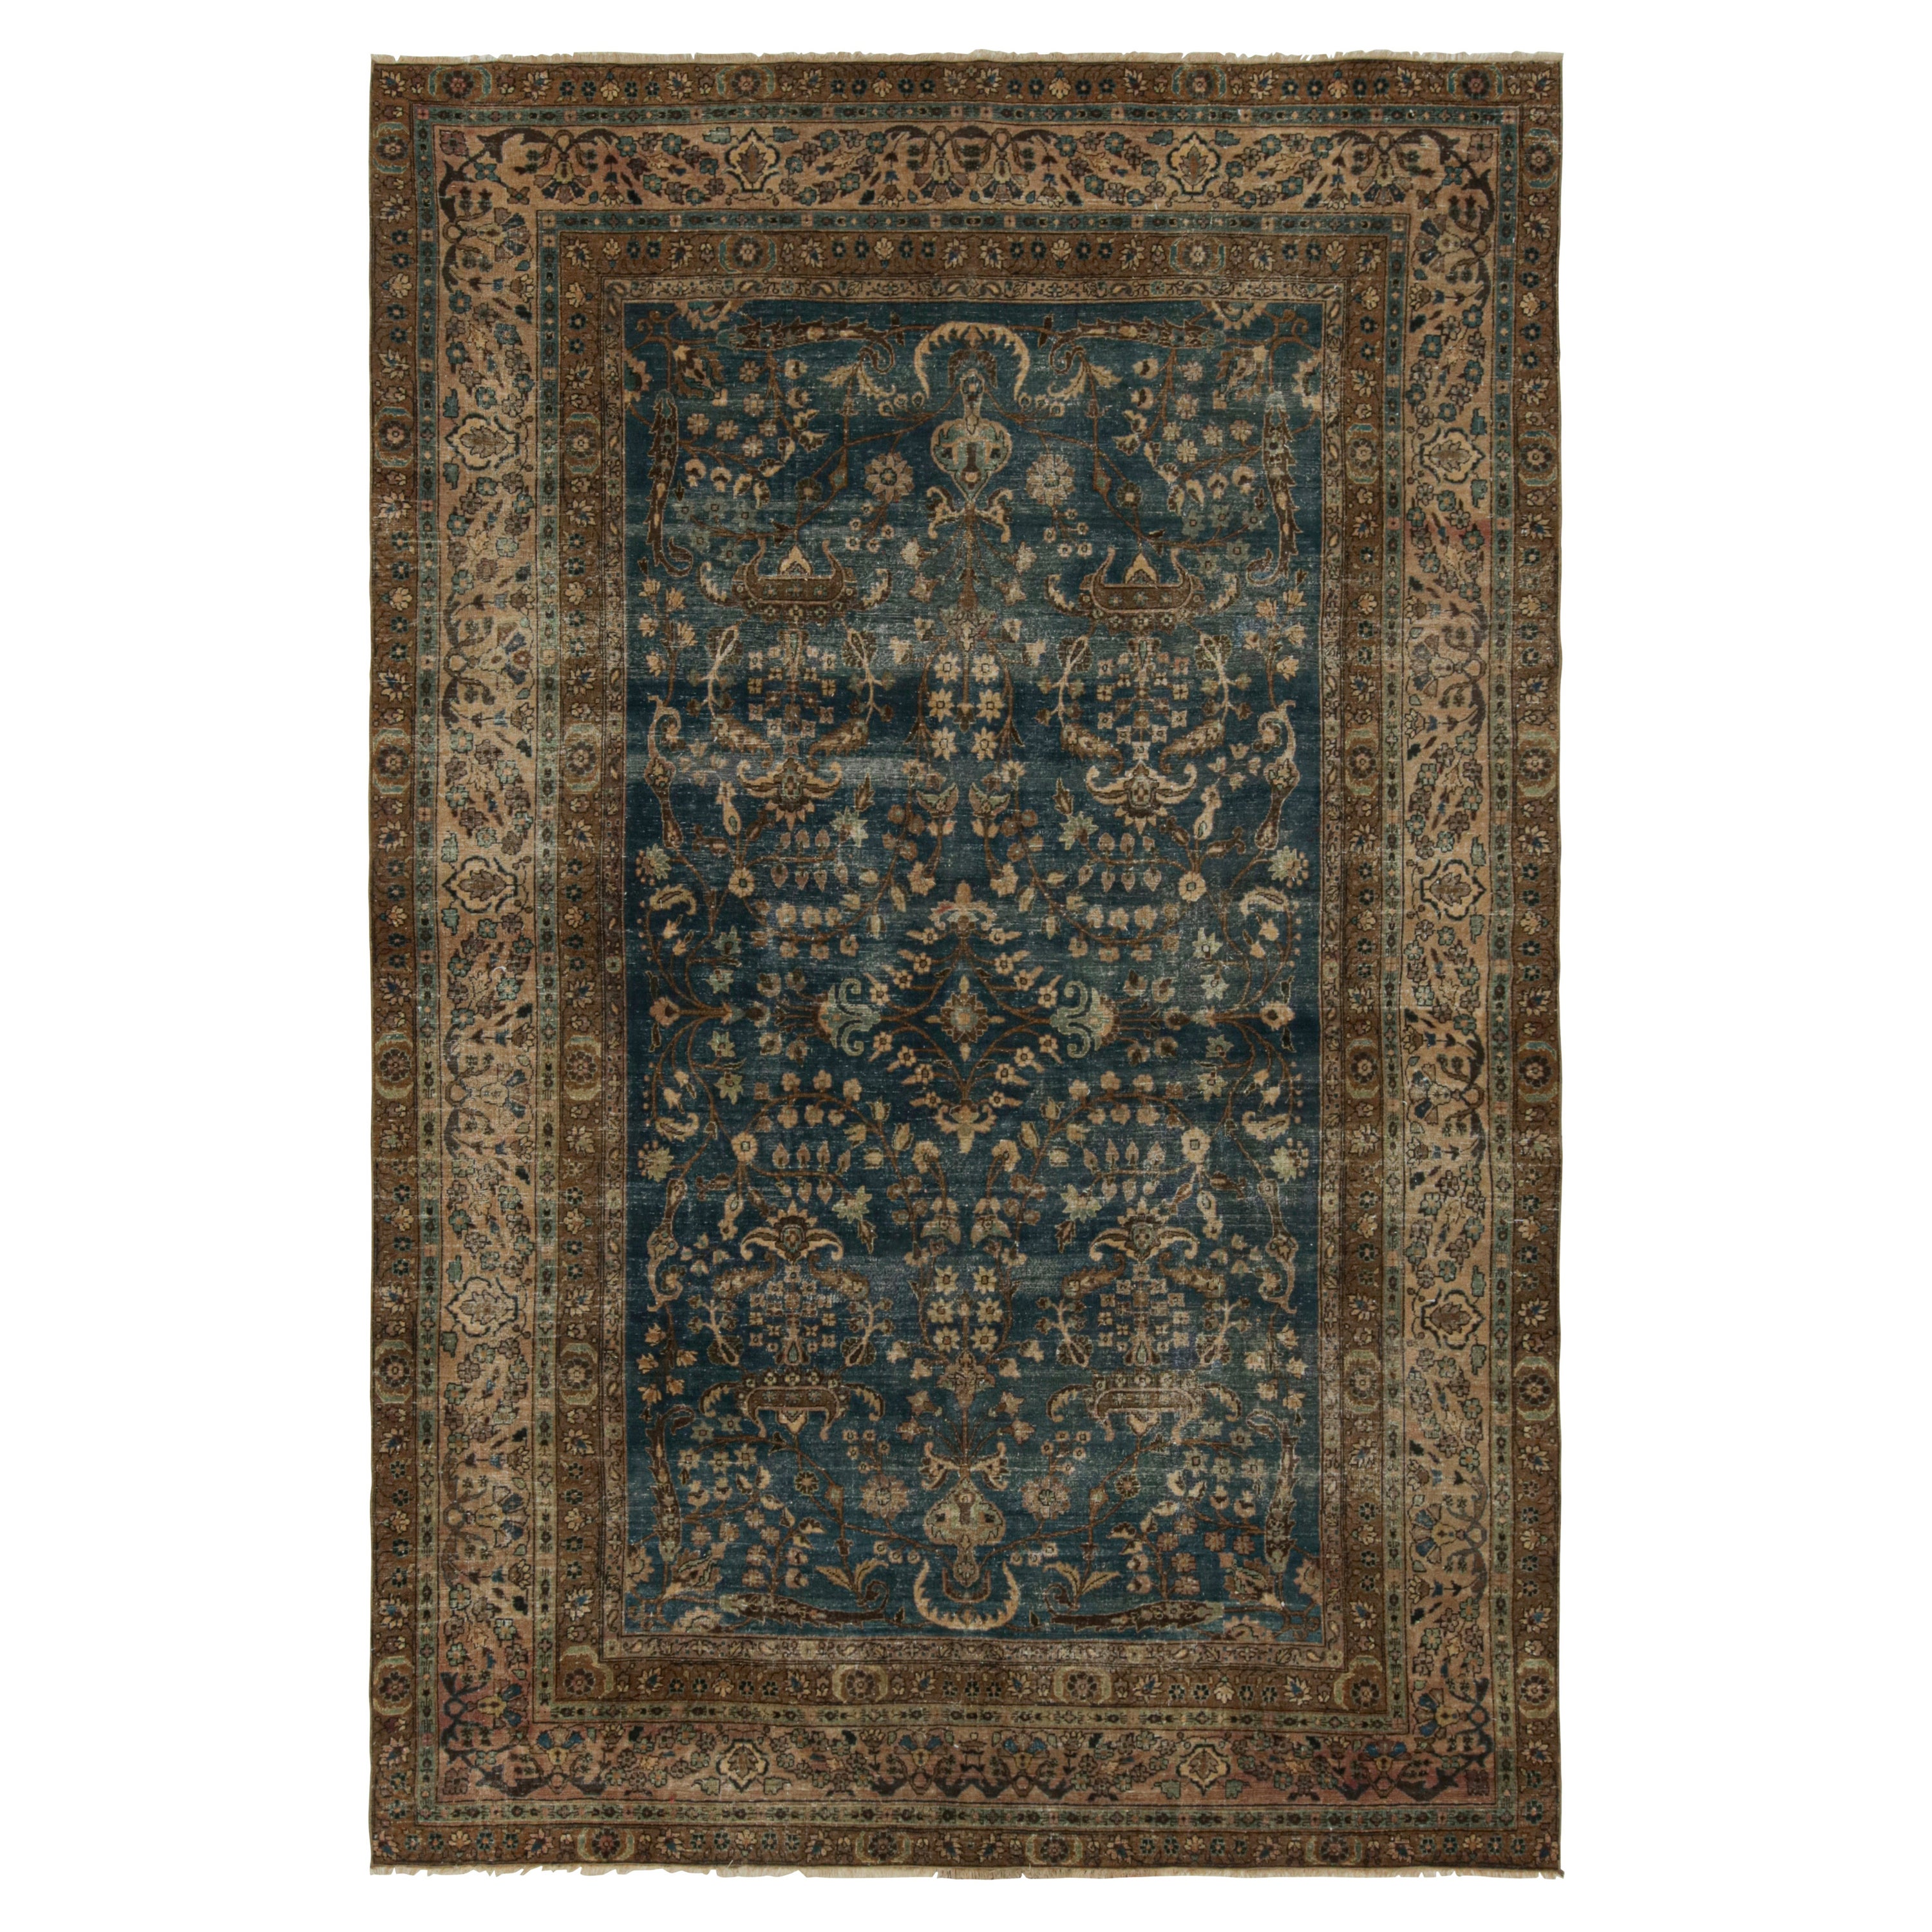 Antique Persian Doroksh Rug, with Floral Patterns, from Rug & Kilim For Sale